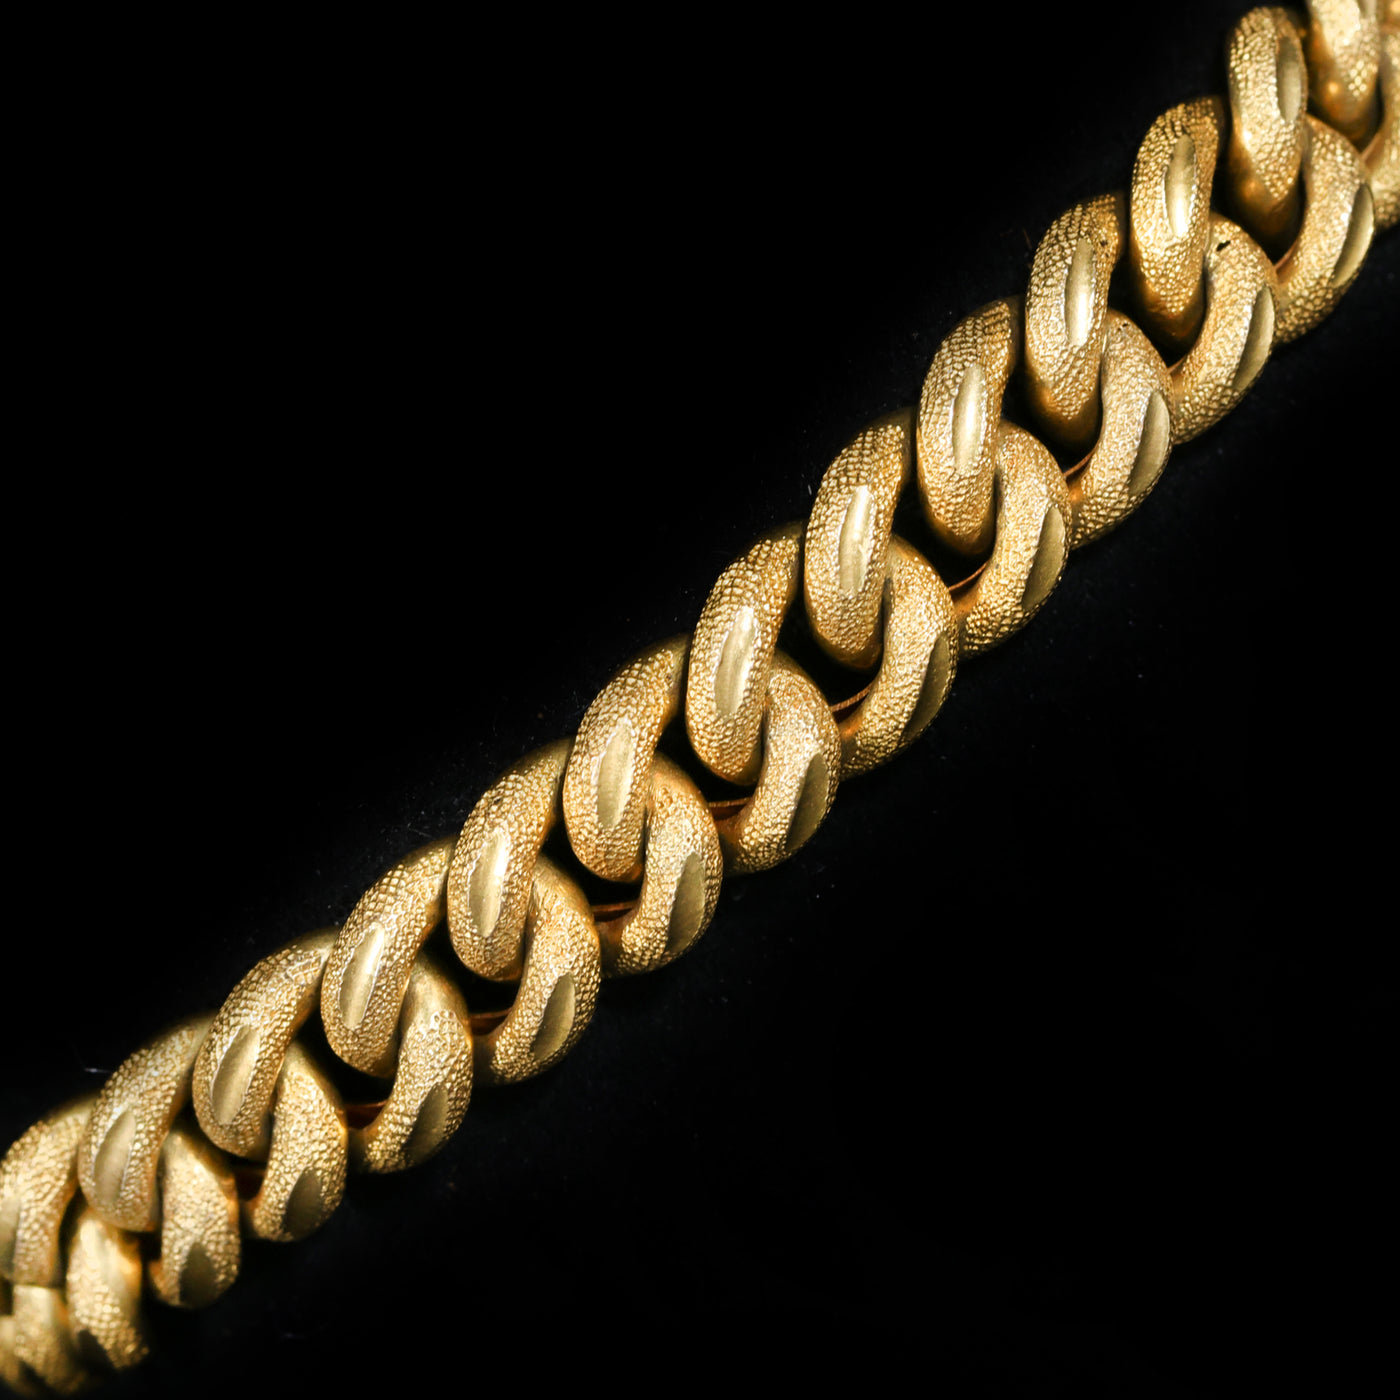 Victorian 18K Yellow Gold Engraved Curb Bracelet